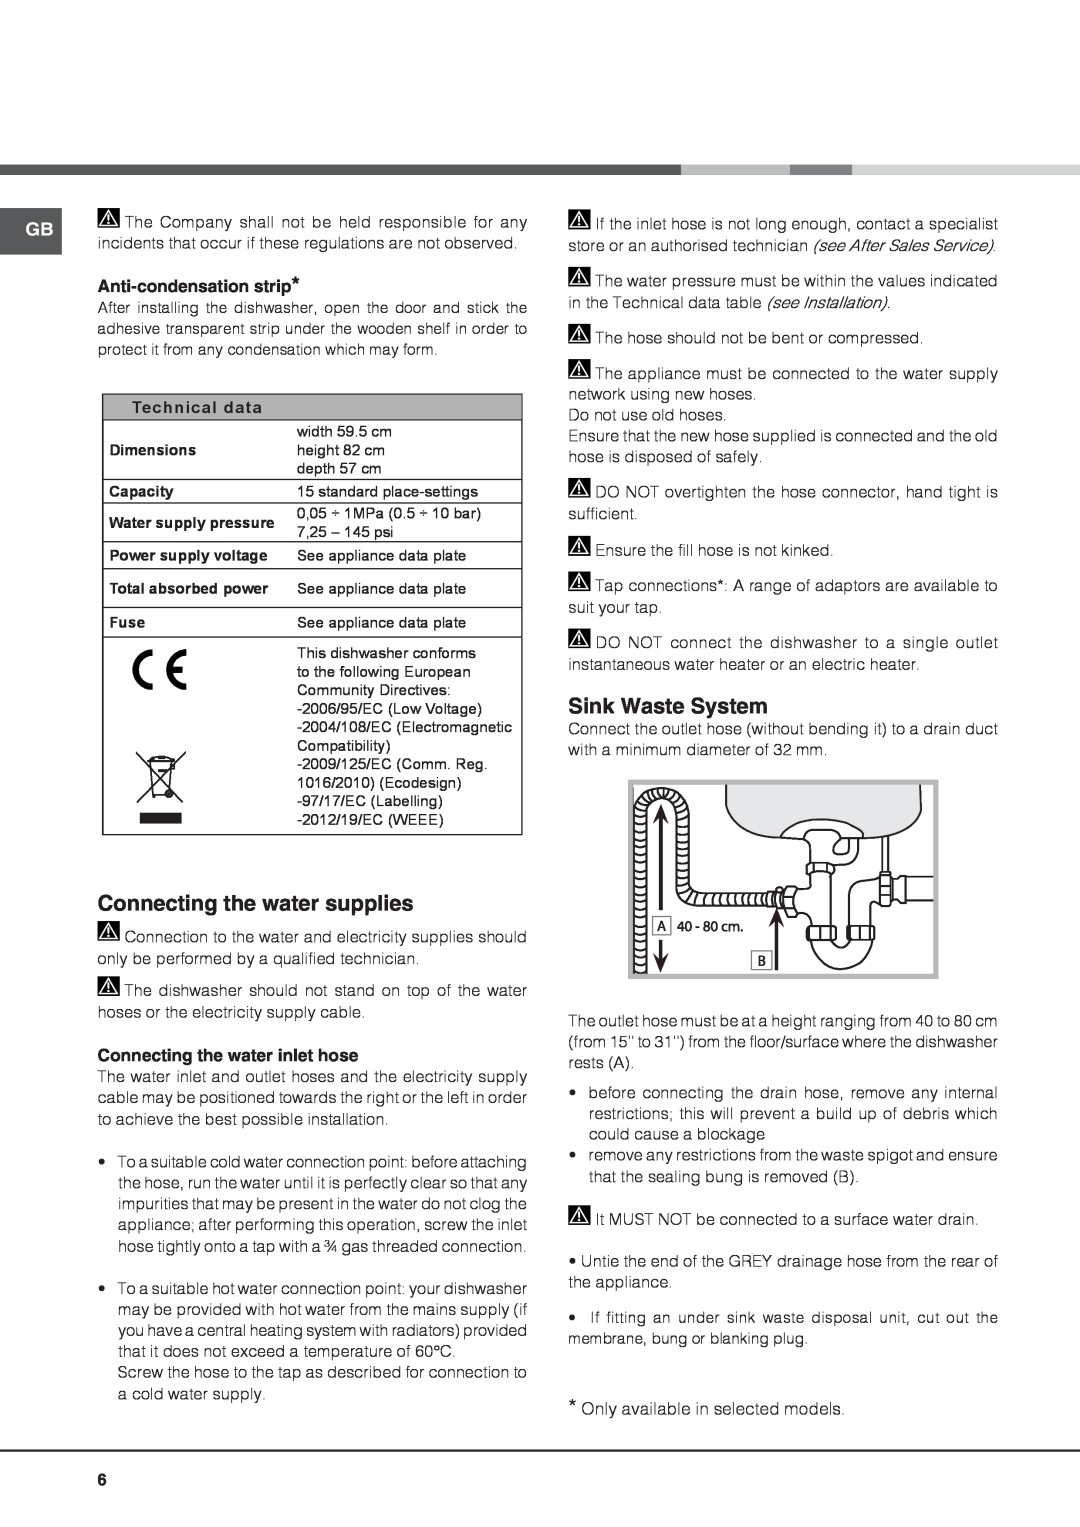 Hotpoint LTF 11S112 manual Sink Waste System, Connecting the water supplies, Anti-condensationstrip, Technical data 